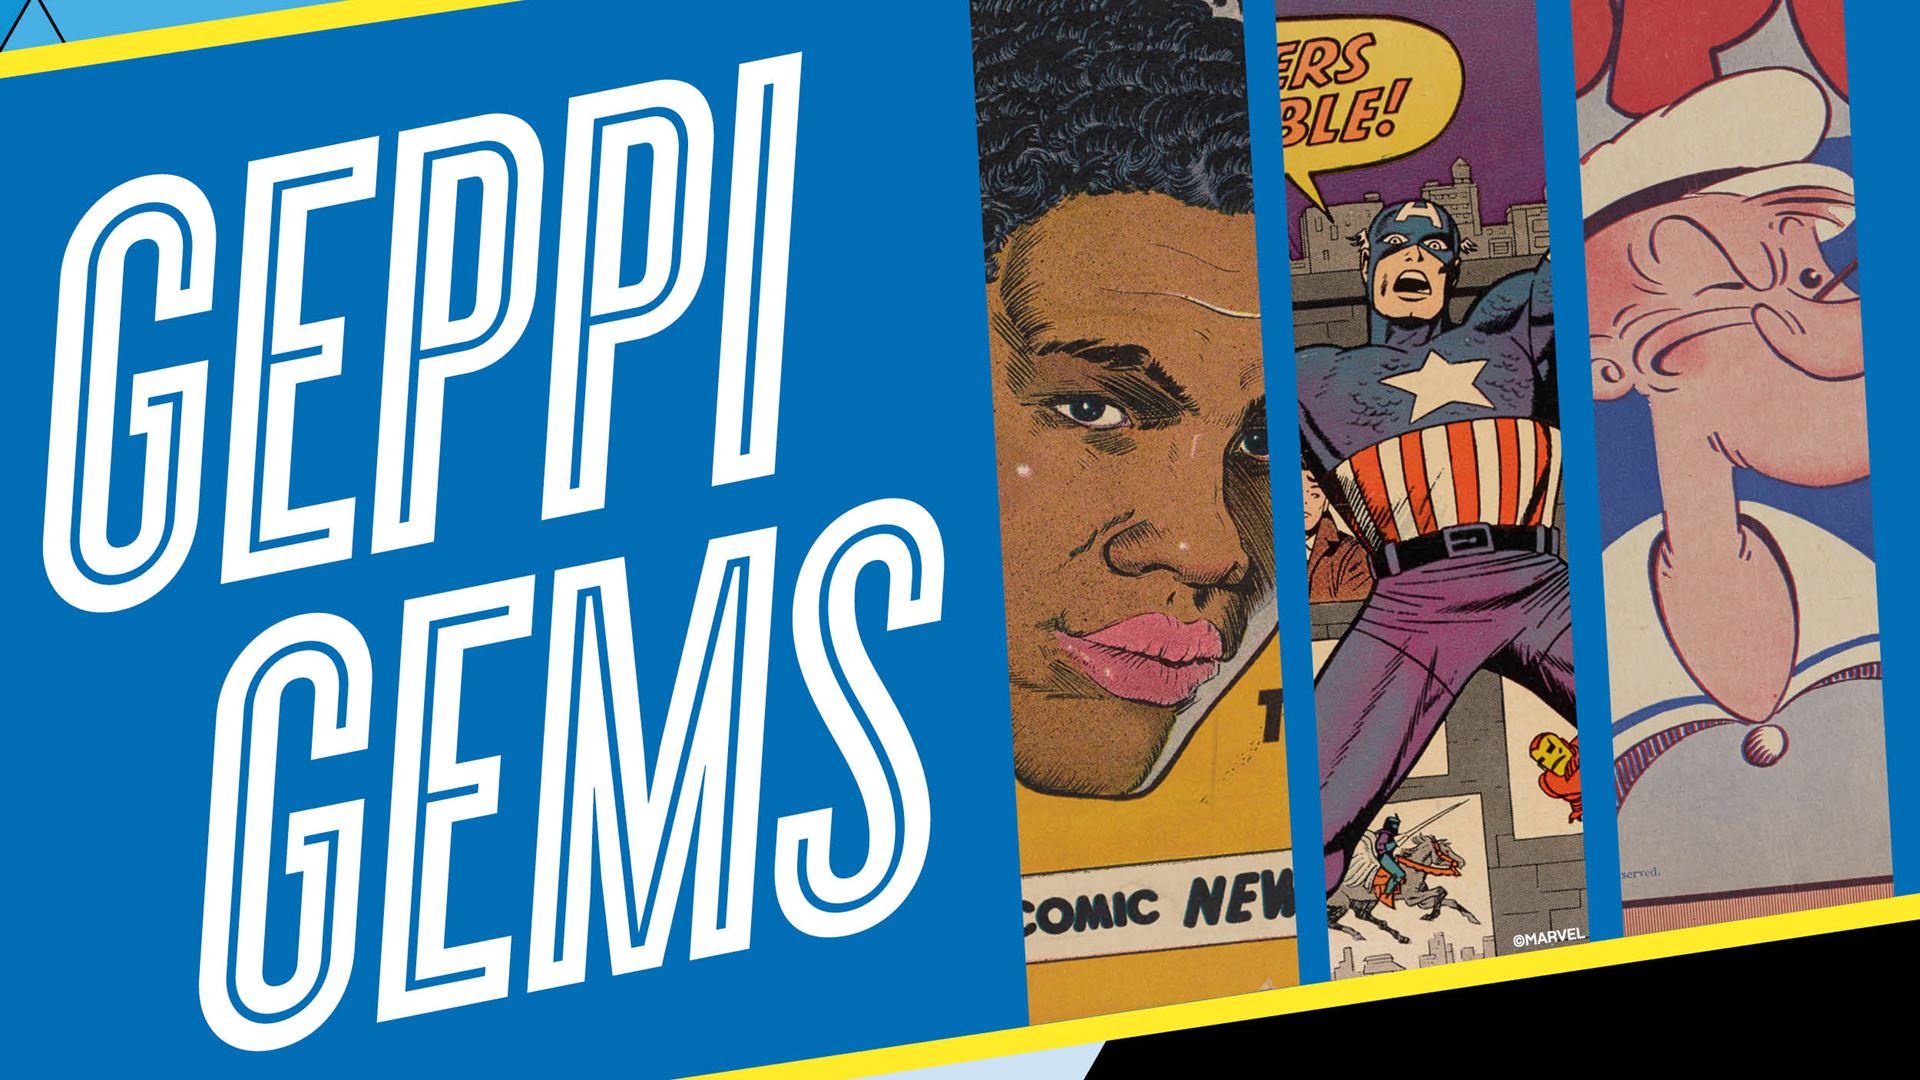 Gems of Comic Art Collection Featured in New Library of Congress Exhibition